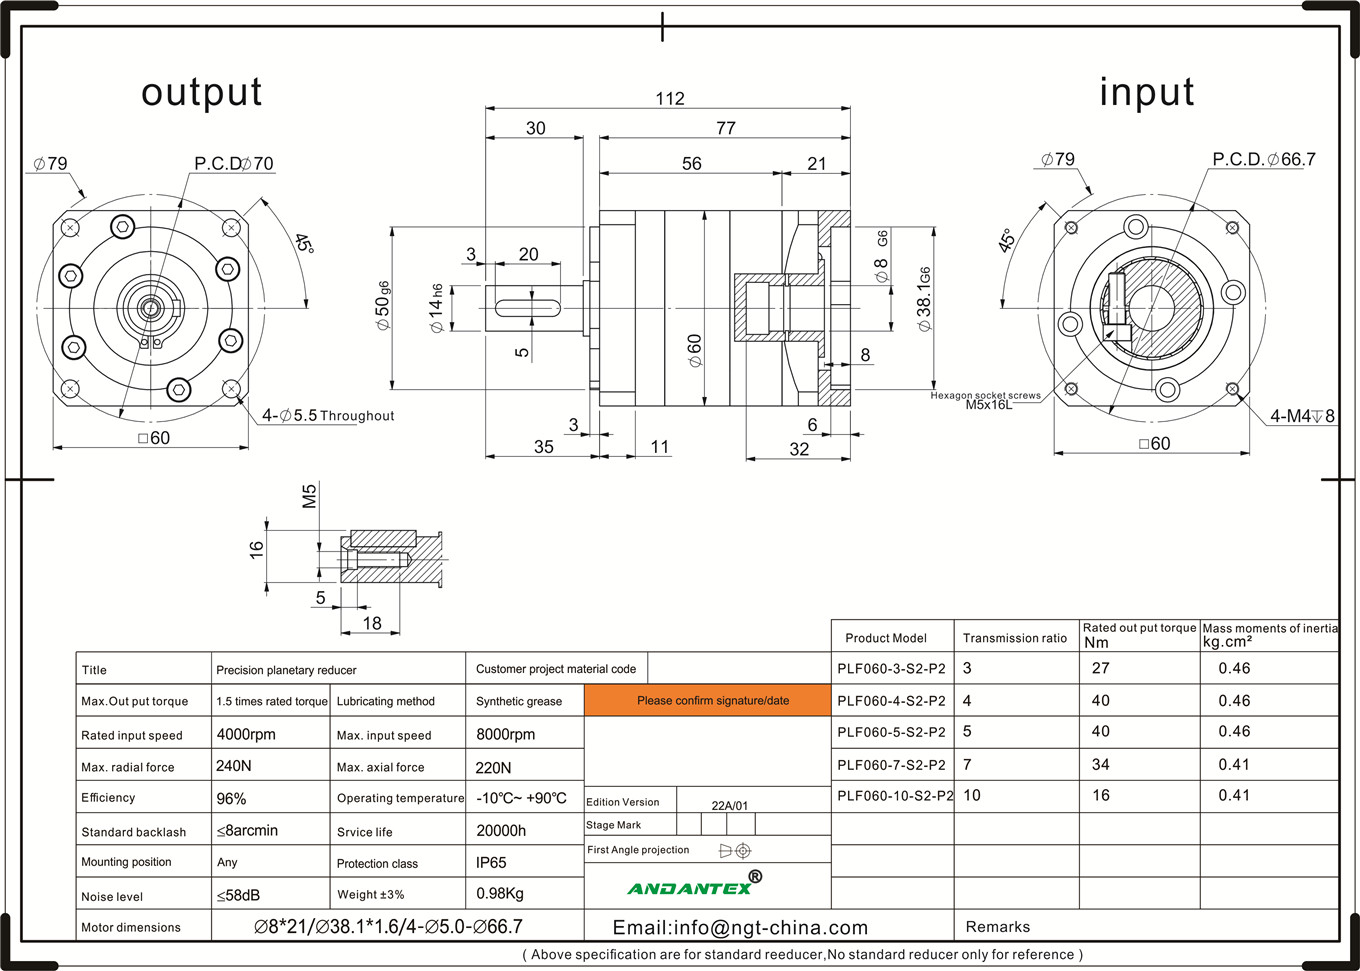 Andantex plf060-10-s2-p2 standard series planetary gearboxes line manufacturing line equipment applications-01